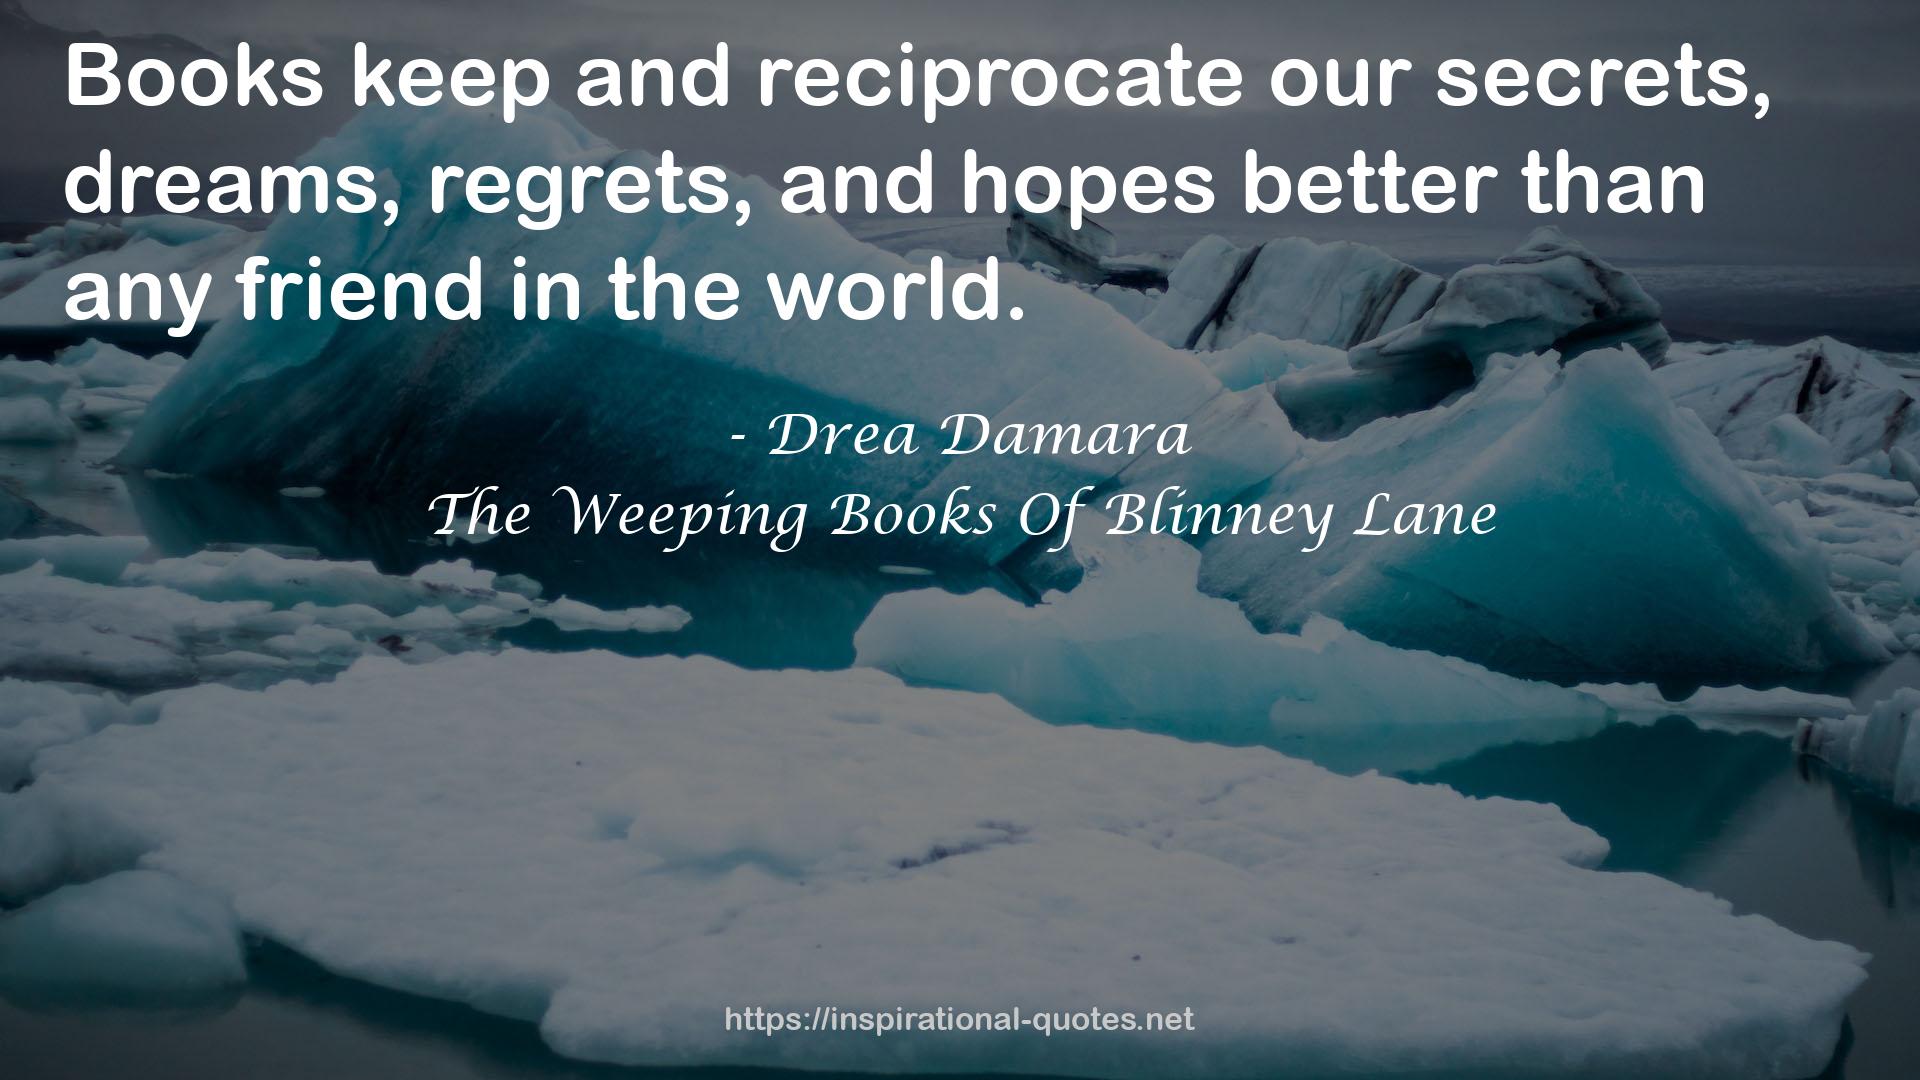 The Weeping Books Of Blinney Lane QUOTES